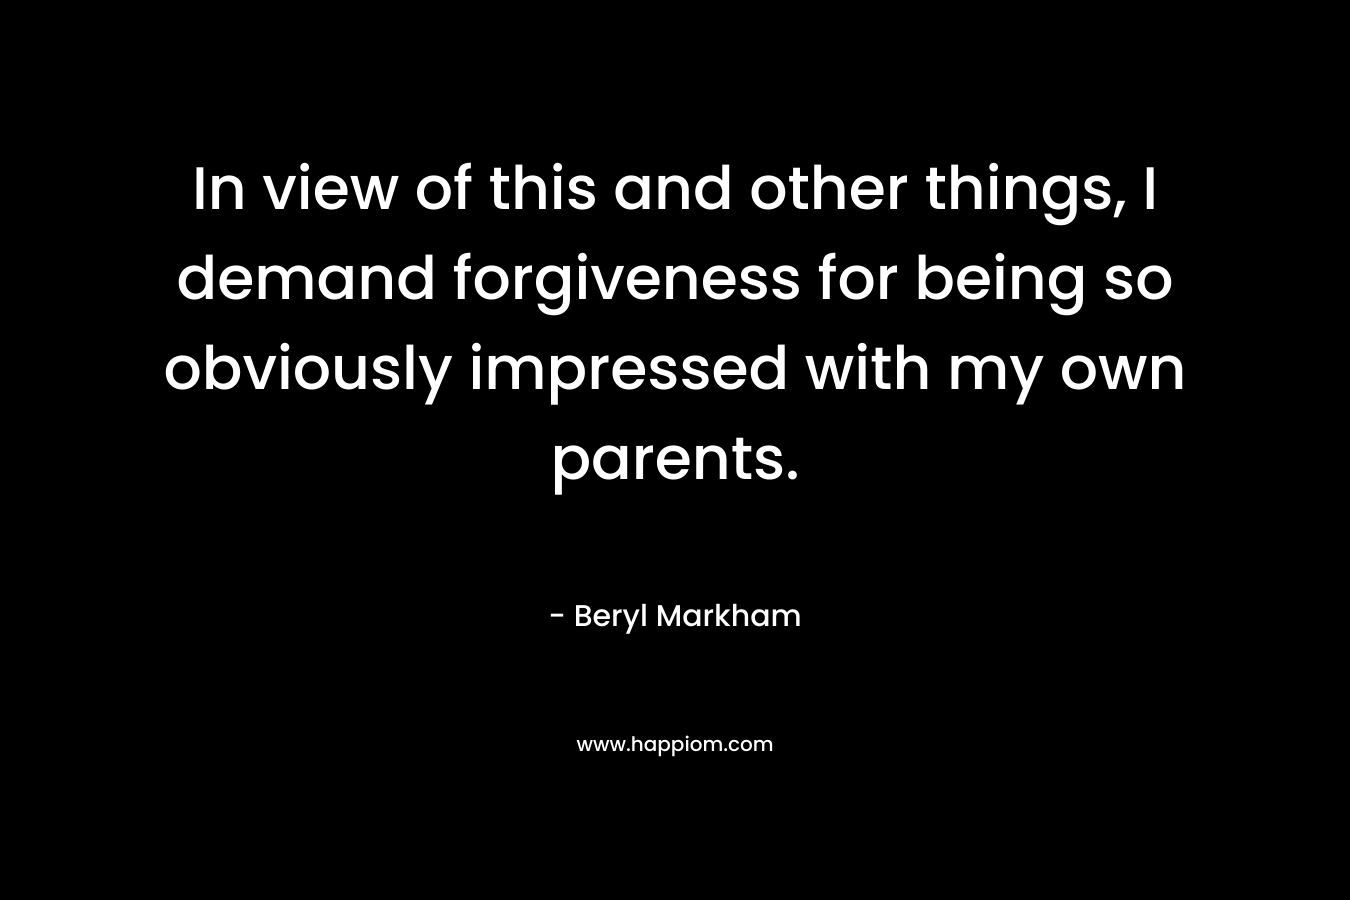 In view of this and other things, I demand forgiveness for being so obviously impressed with my own parents. – Beryl Markham